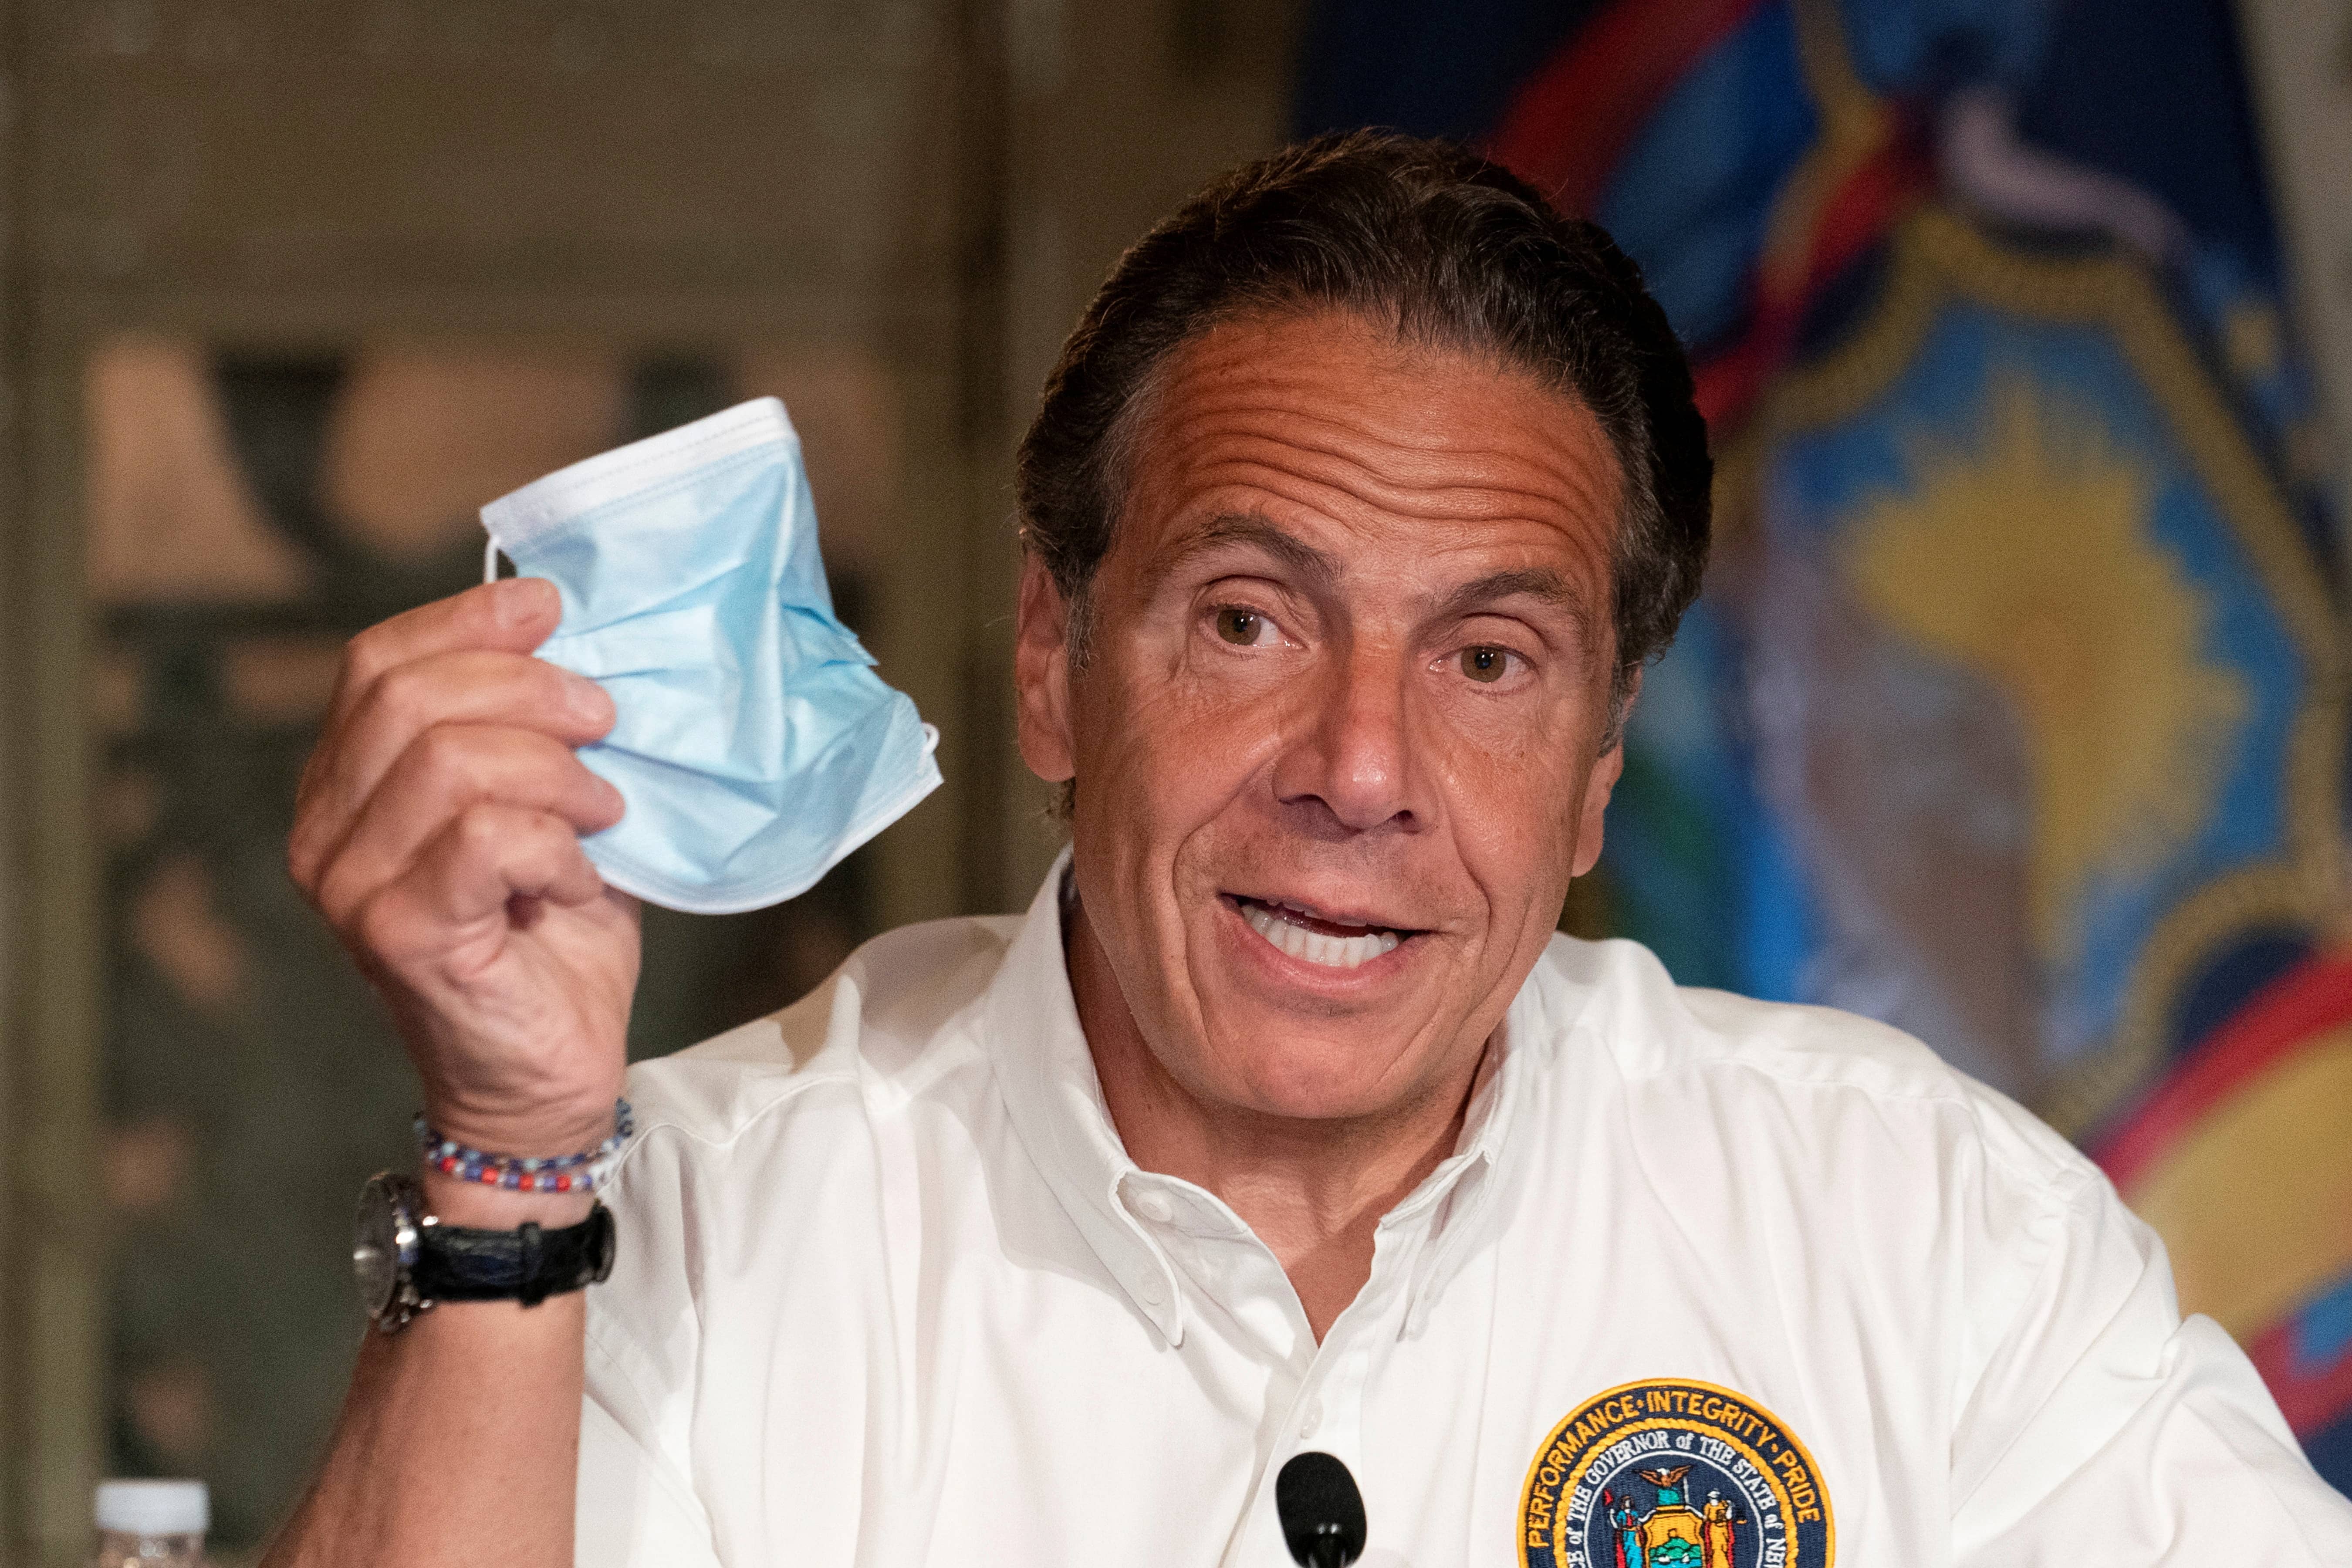 file-photo-new-york-governor-andrew-cuomo-discusses-the-wearing-of-masks-as-he-speaks-at-a-news-conference-about-the-east-side-access-in-new-york